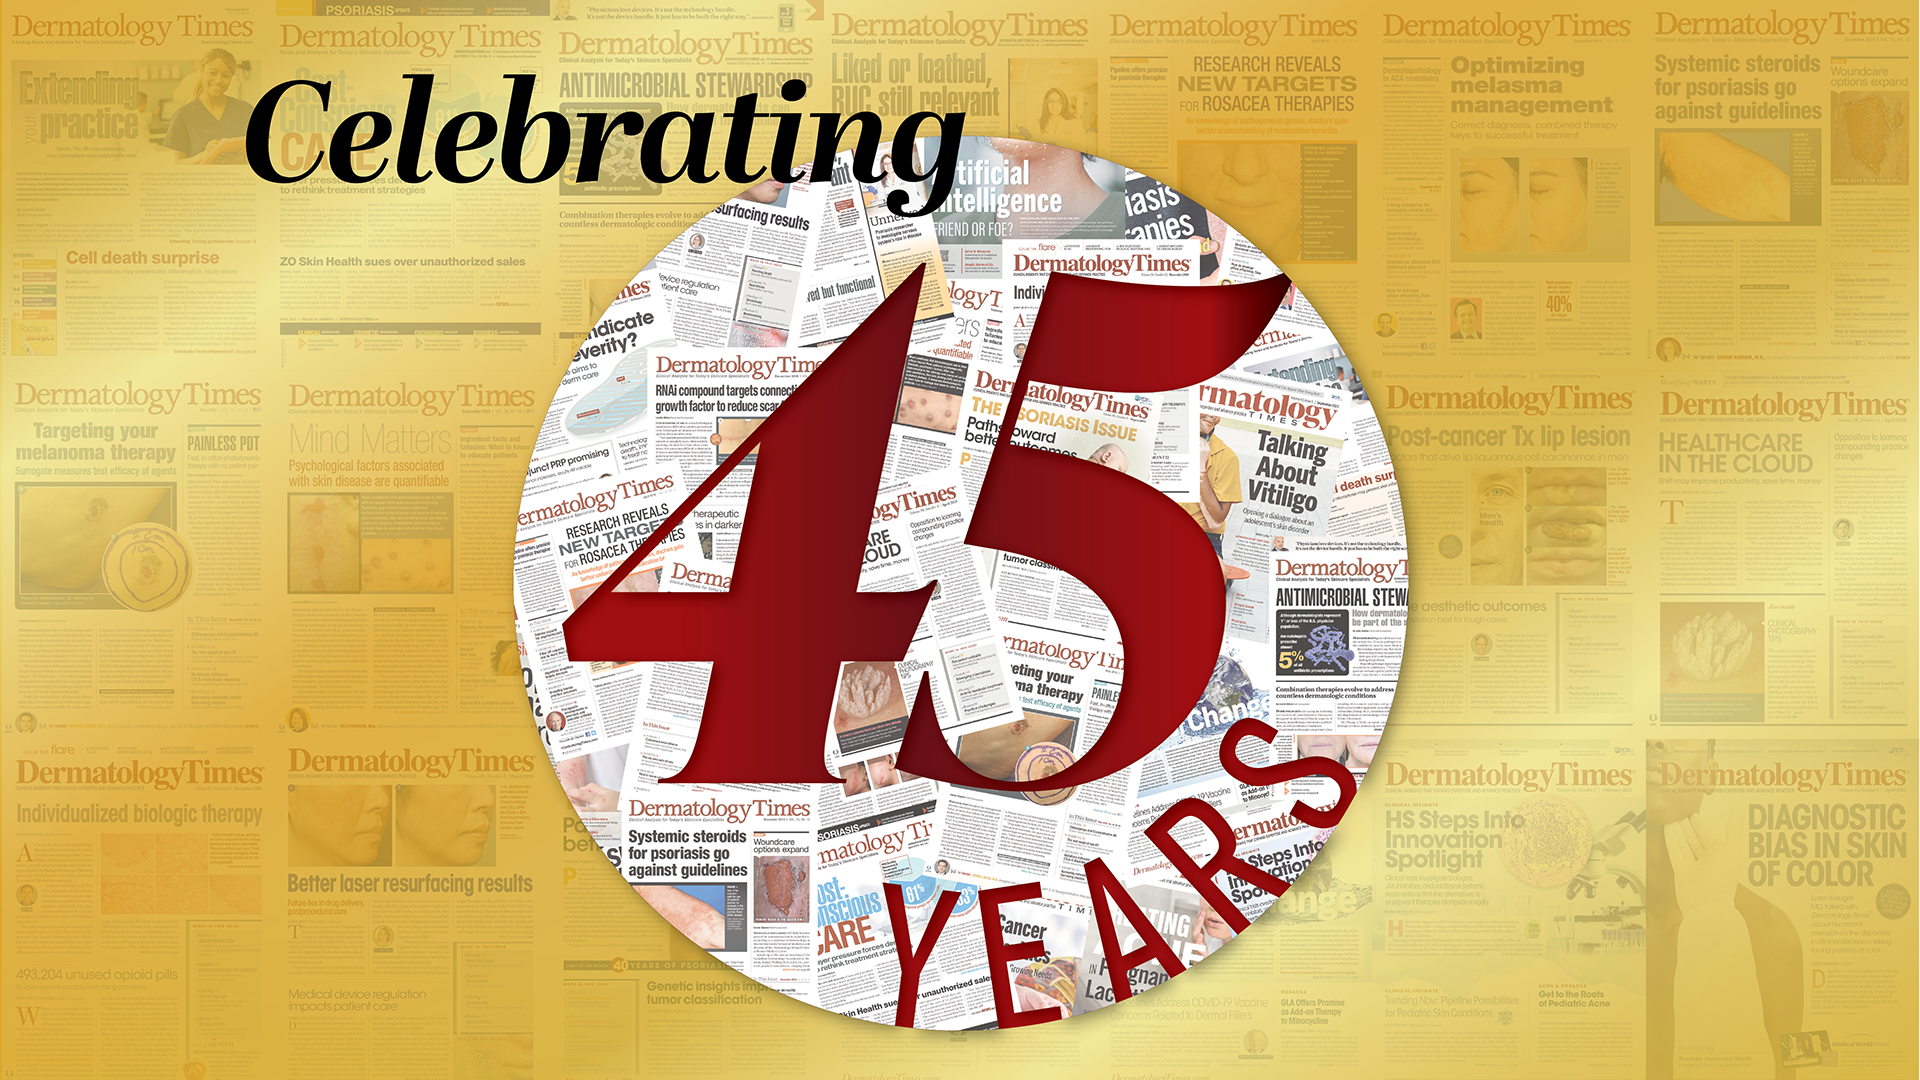 Commemorating Dermatology Times’ 45th Anniversary